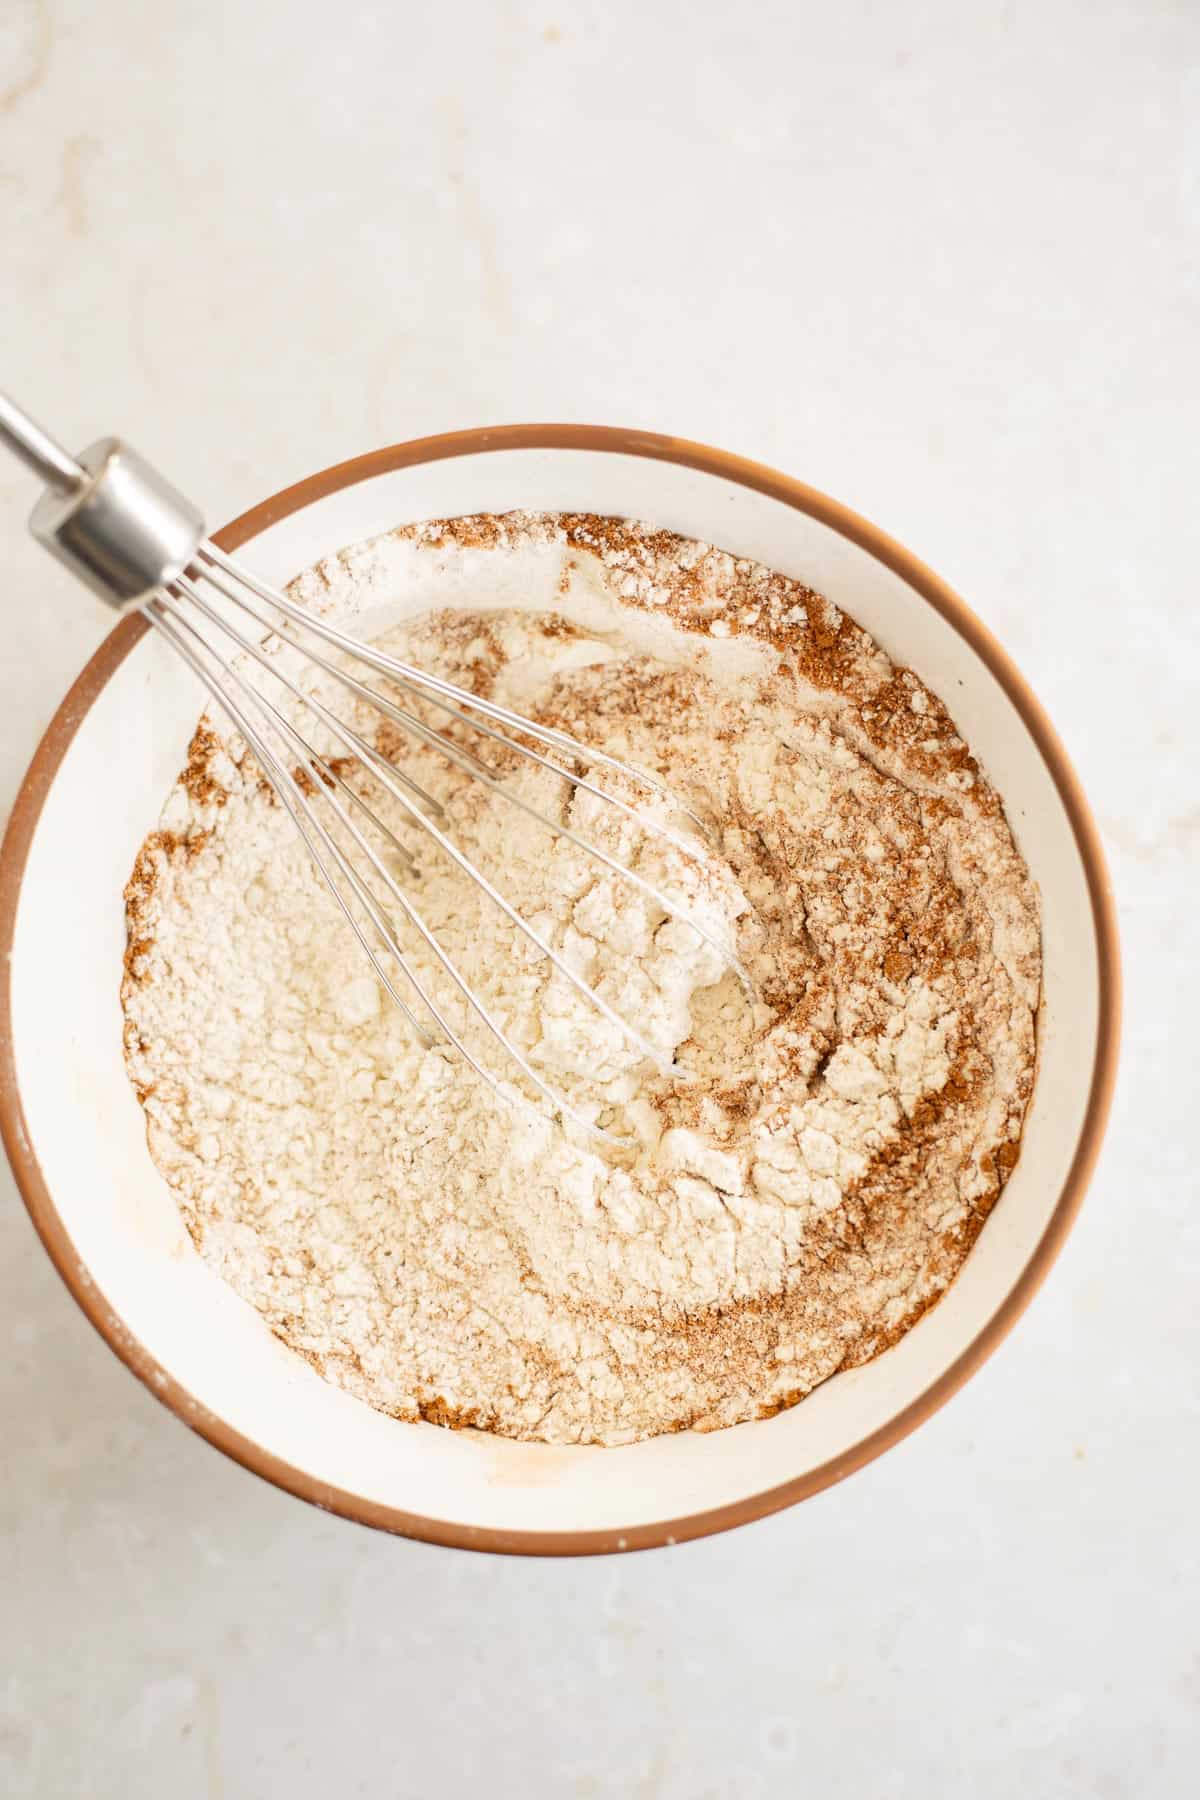 flour, baking soda, and spices in a white bowl with a whisk.